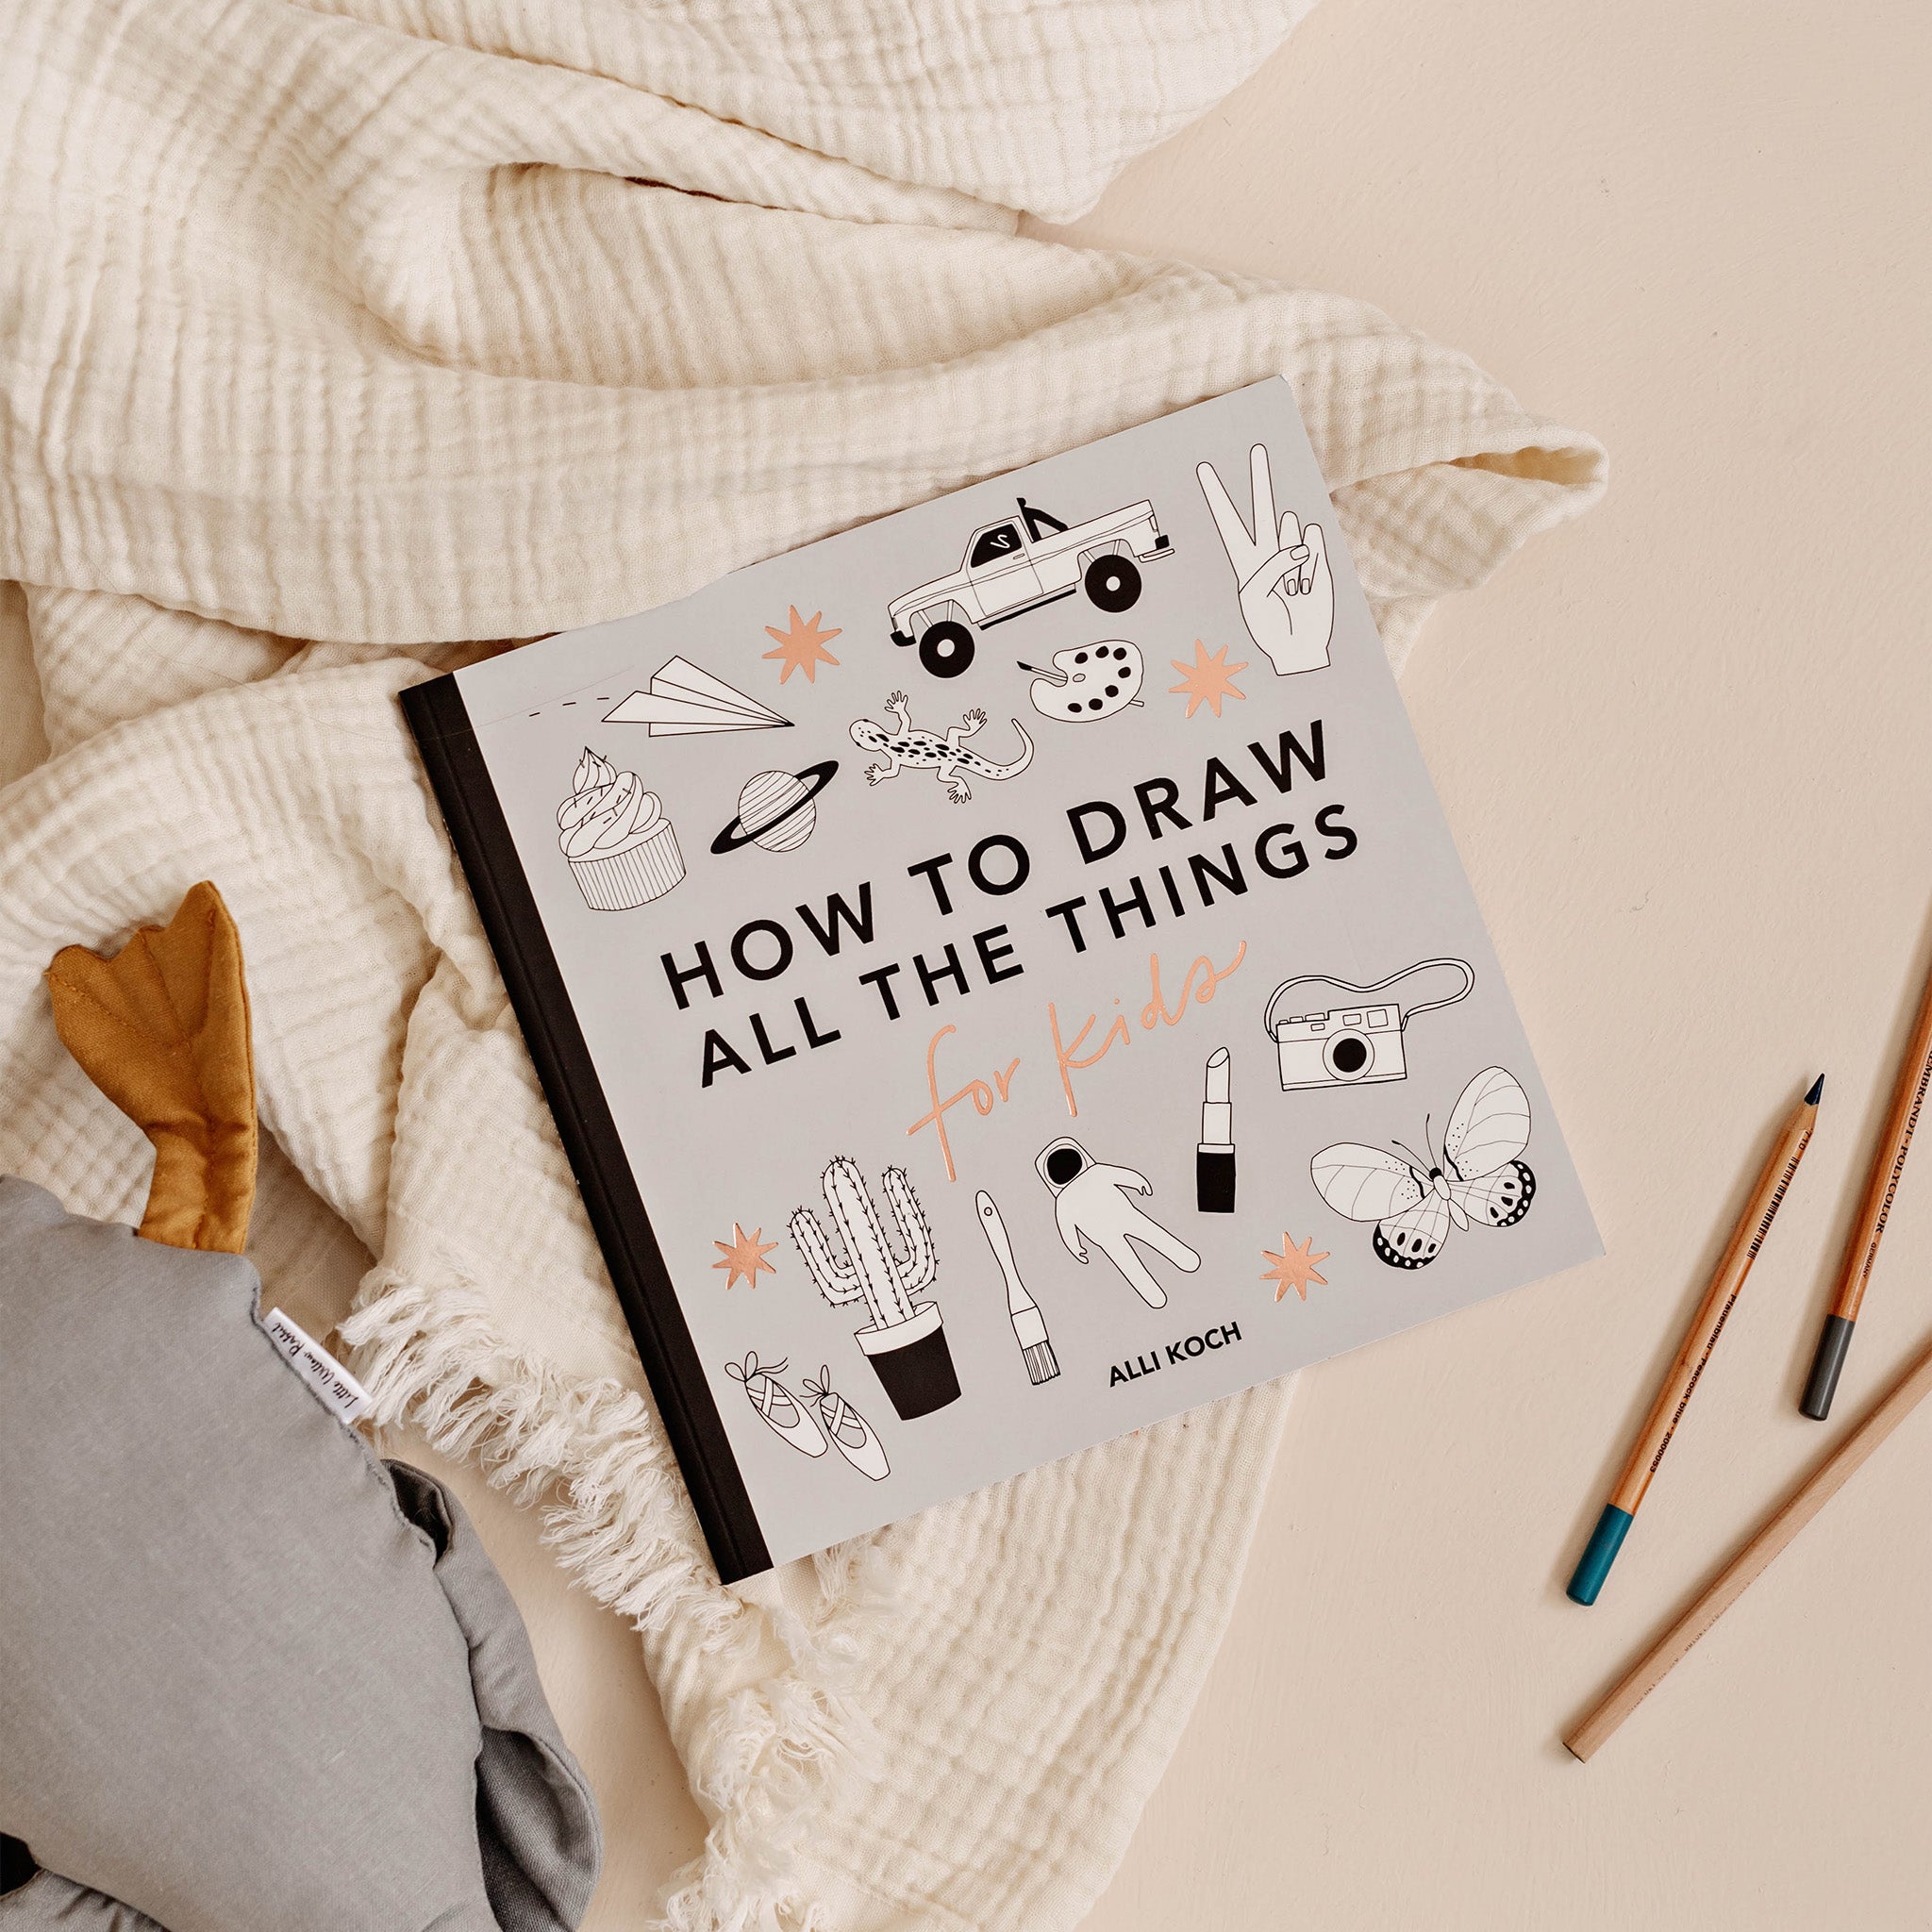 How to Draw Unusual Things: Pencil Sketching Workbook for Beginners. Drawing Journal with Simple Step by Step Instructions.